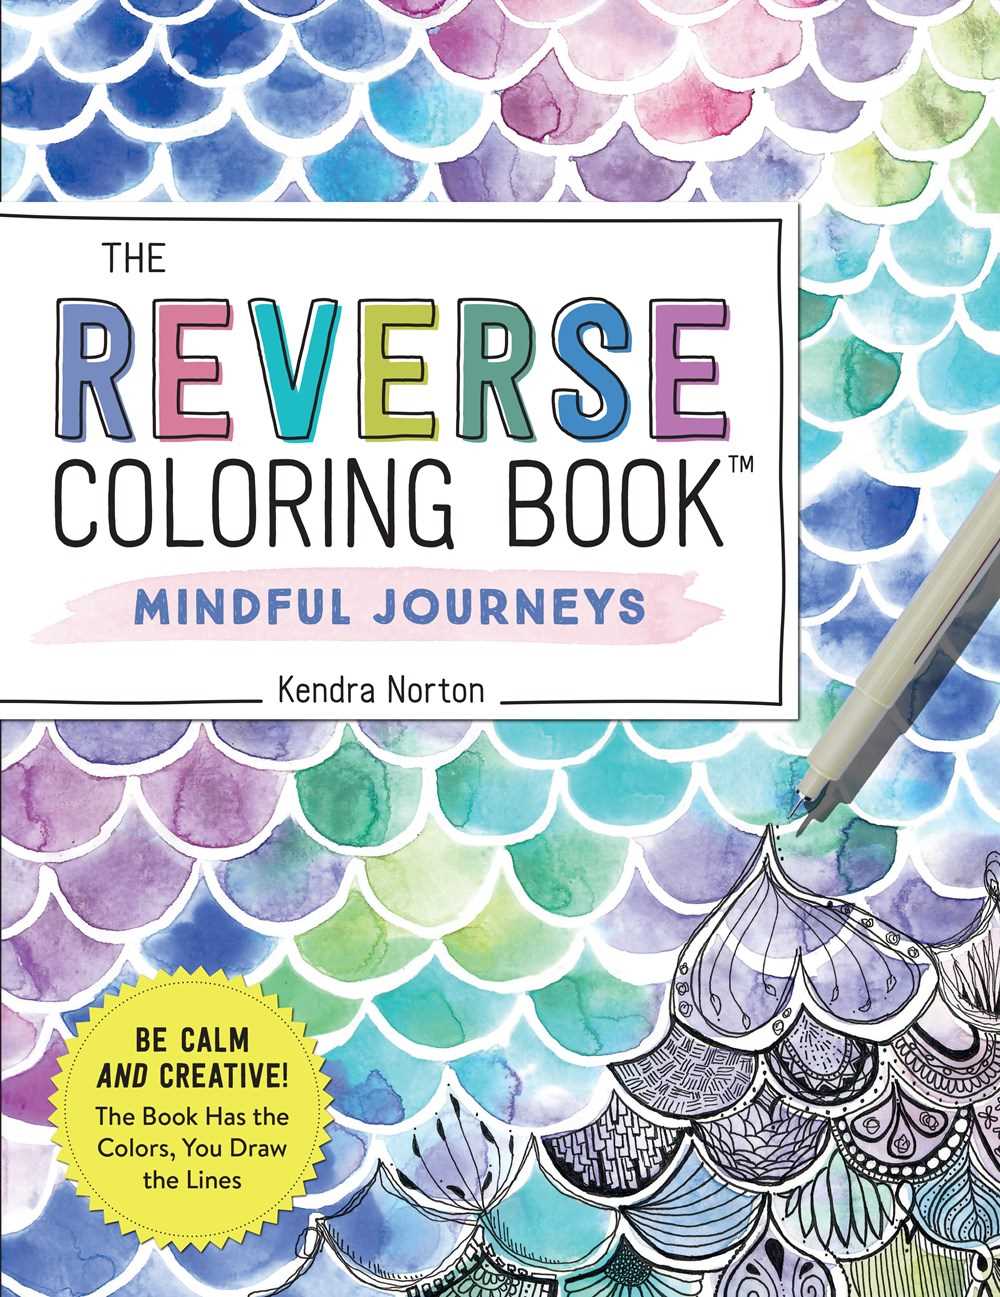 Mindful Journeys (The Reverse Coloring Book™)